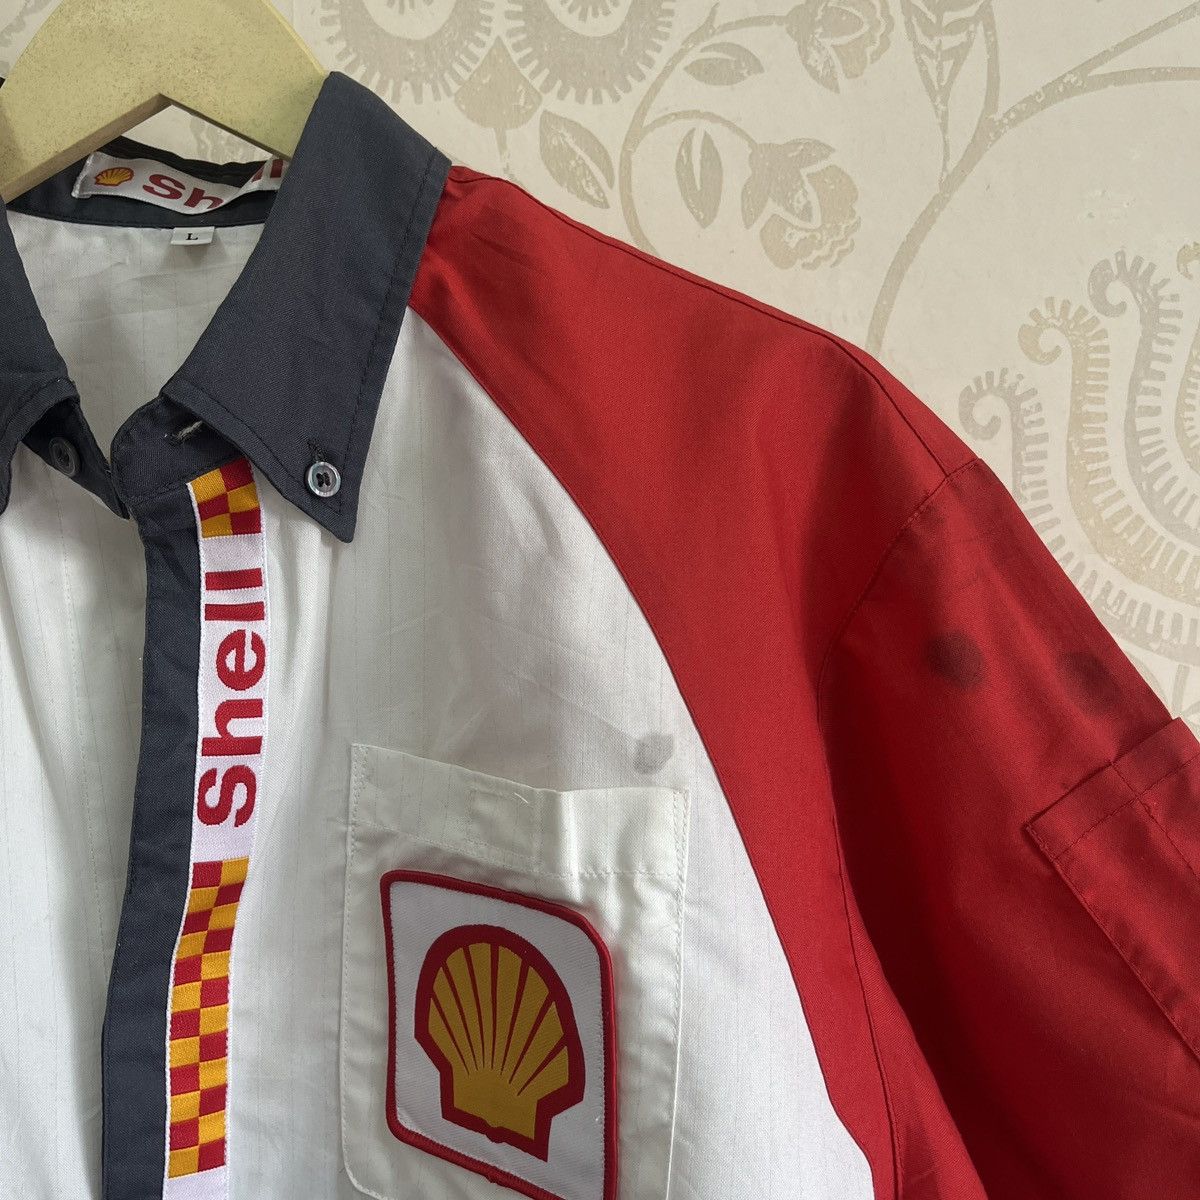 Vintage Shell Workers Uniform Shirts Japan - 5